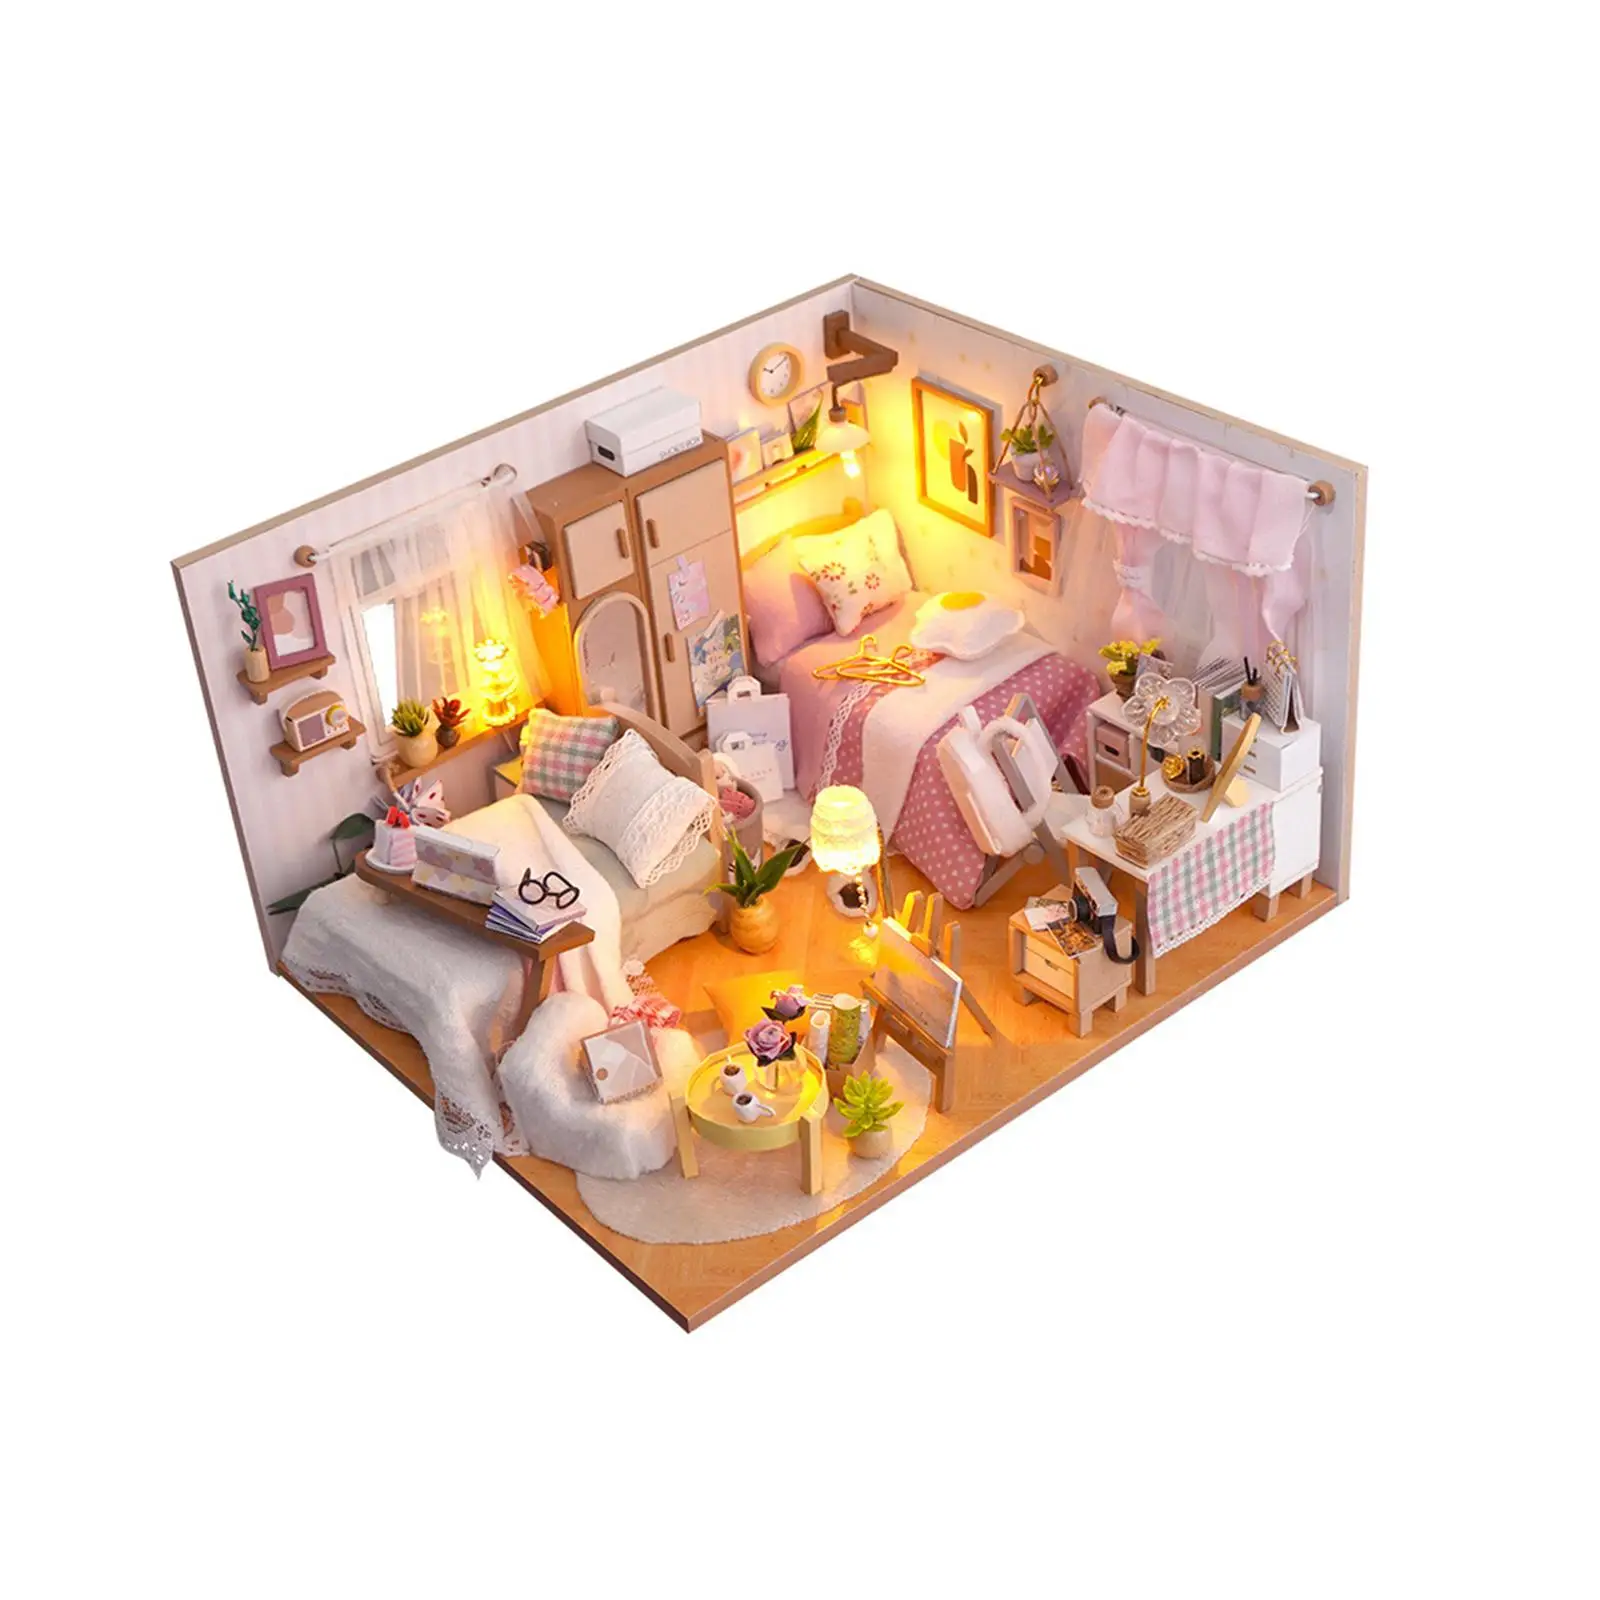 Wooden Miniature Dollhouse Kits Collectibles Birthday Gifts Creative Bedroom